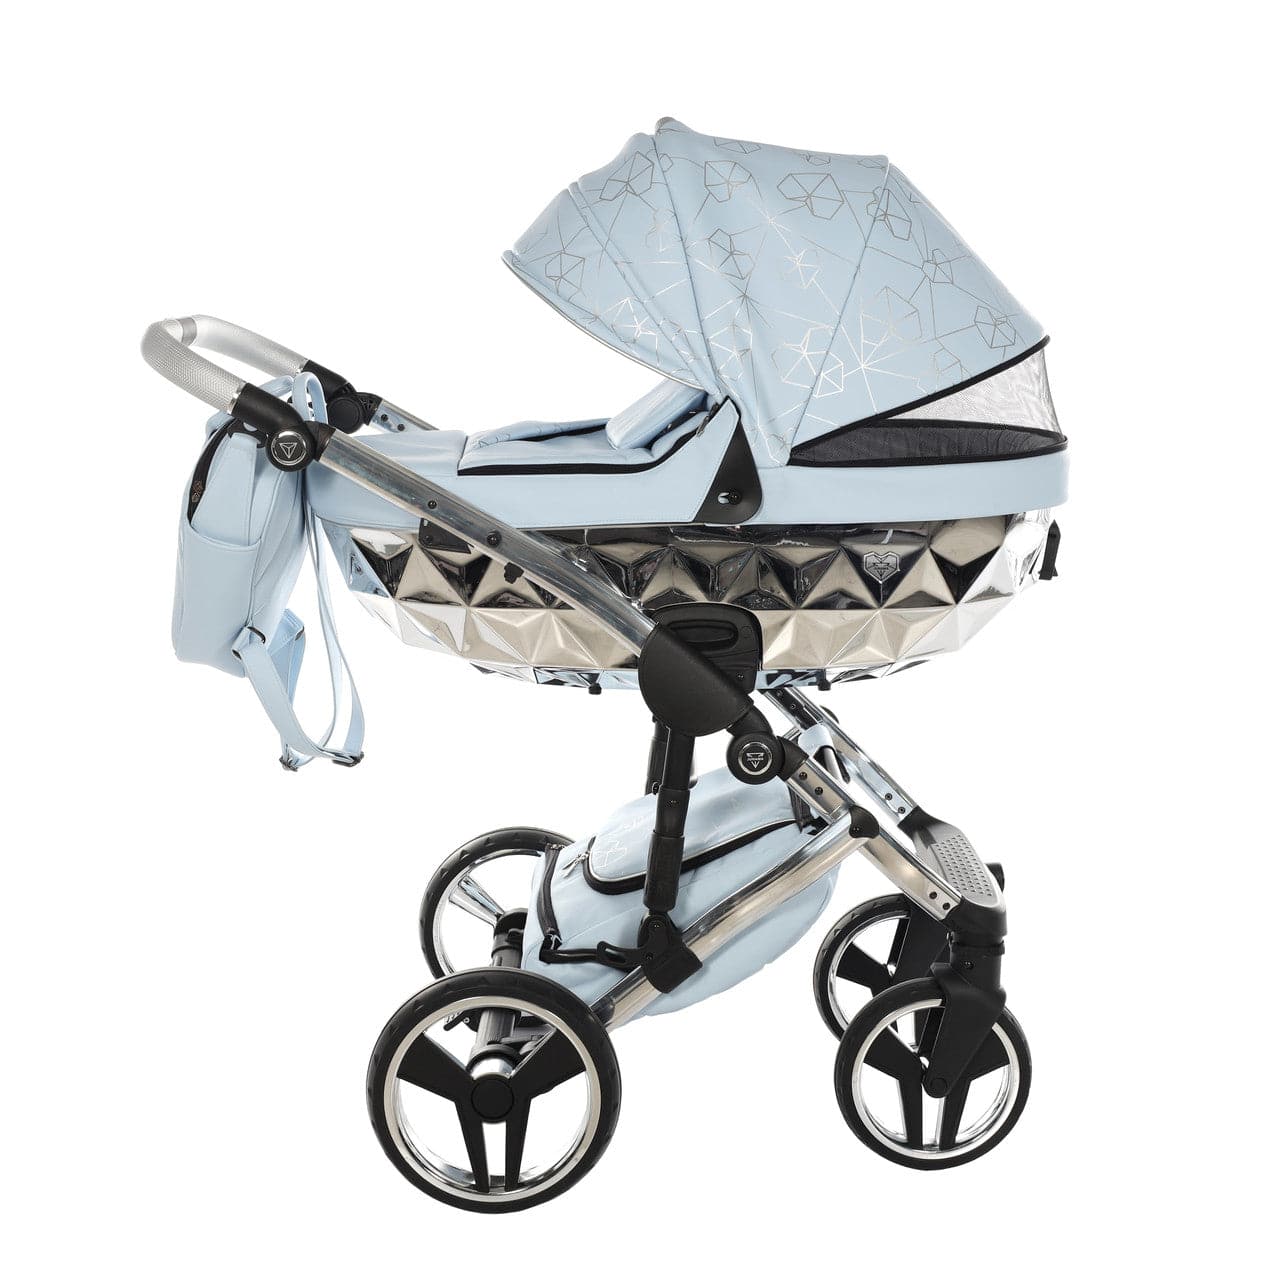 Junama Heart 3 In 1 Travel System - Blue - For Your Little One